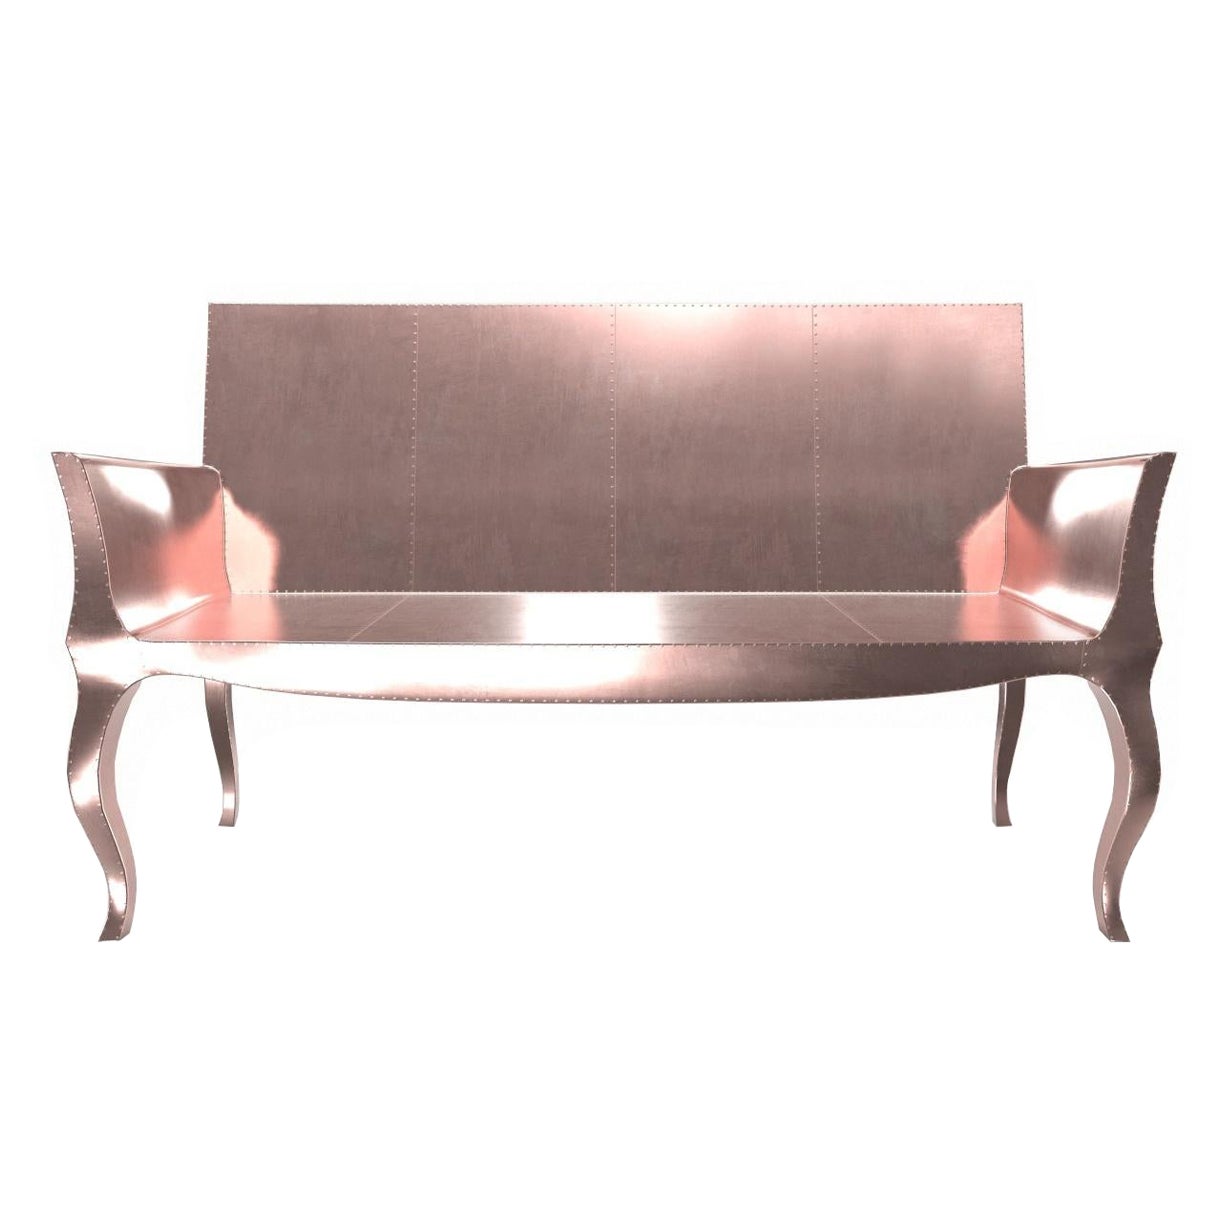 Louise Settee Art Deco Benches in Smooth Copper by Paul Mathieu for S Odegard For Sale